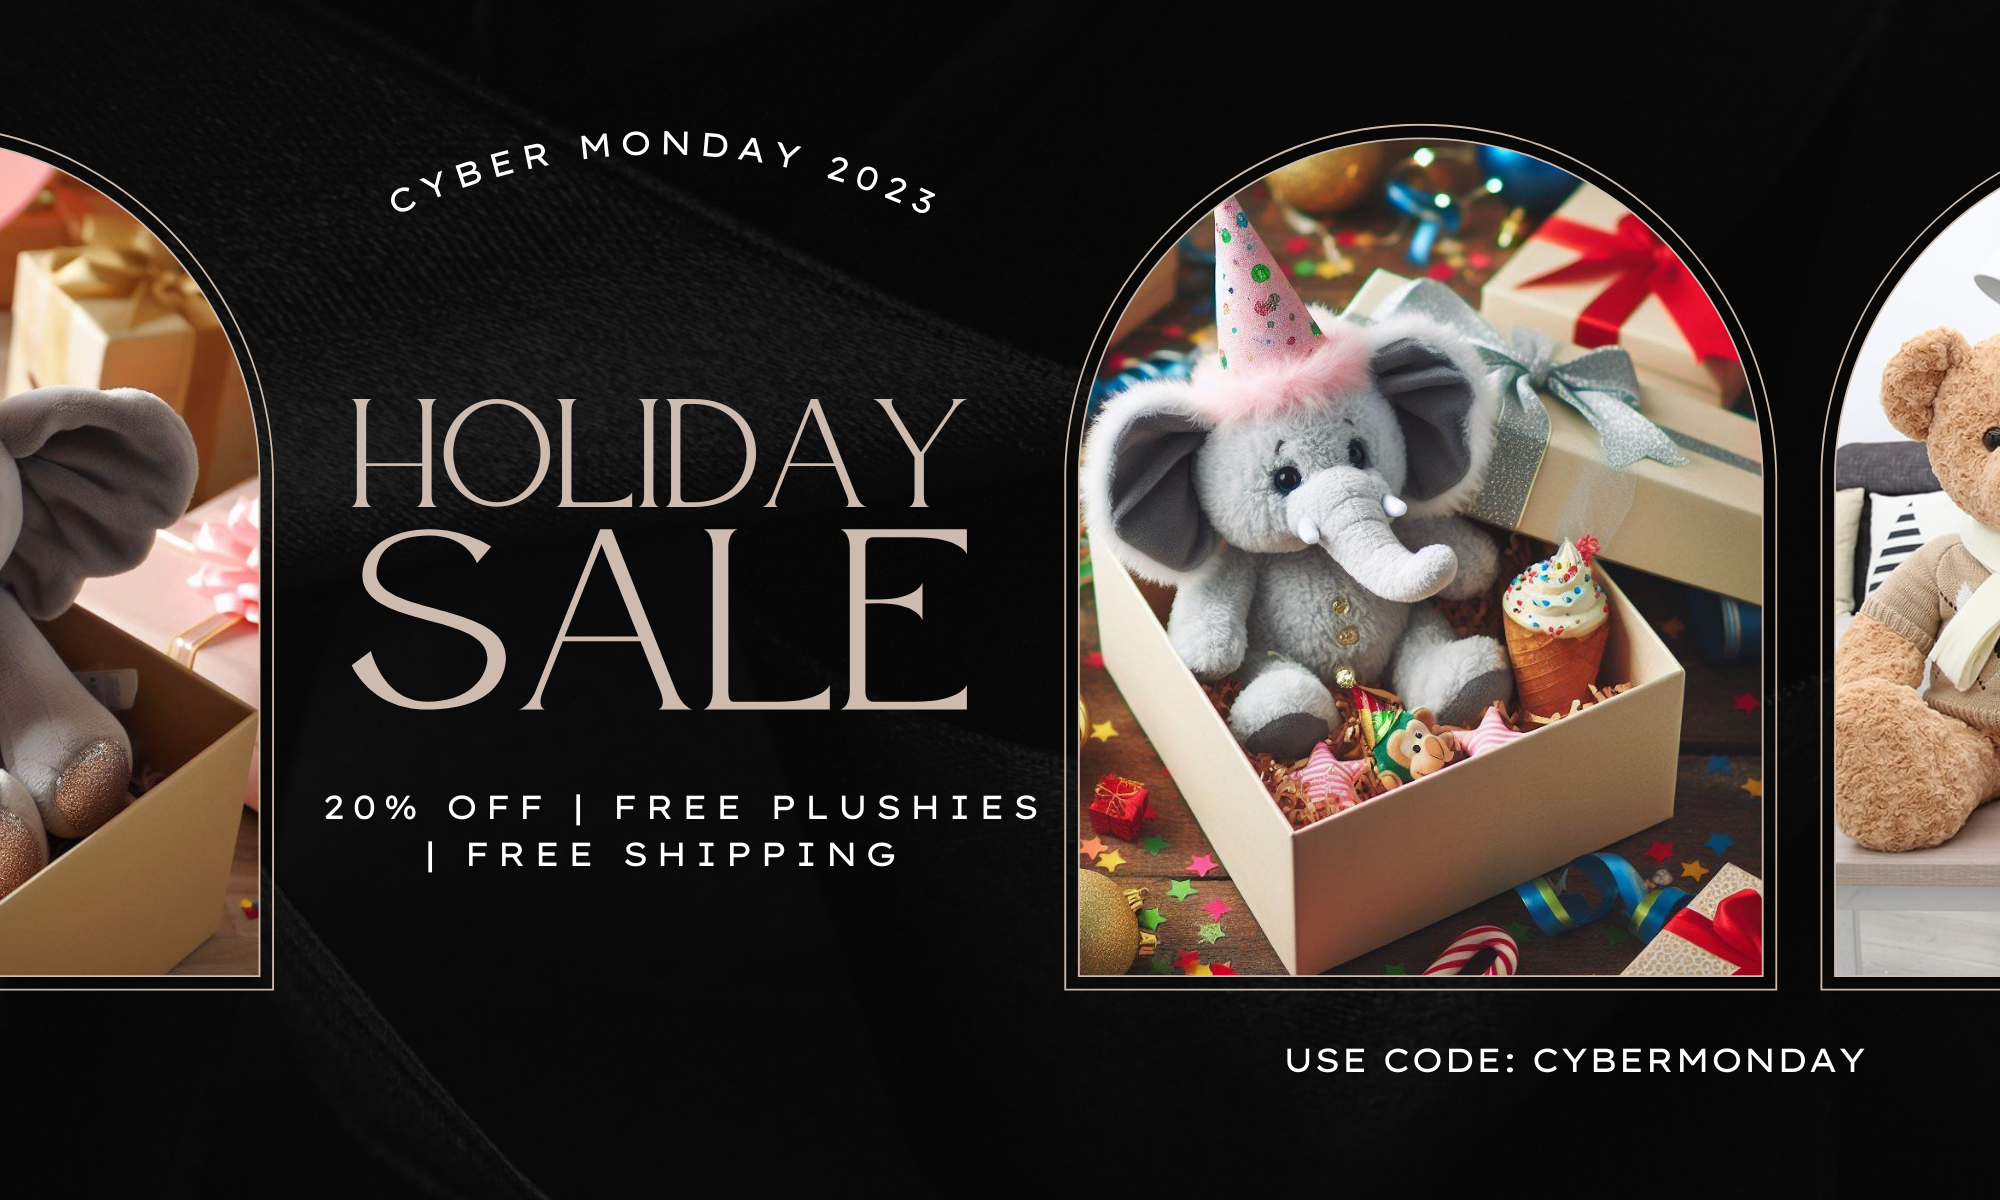 Holiday Sale on Large Teddy bears, cute plushies and stuffed animals